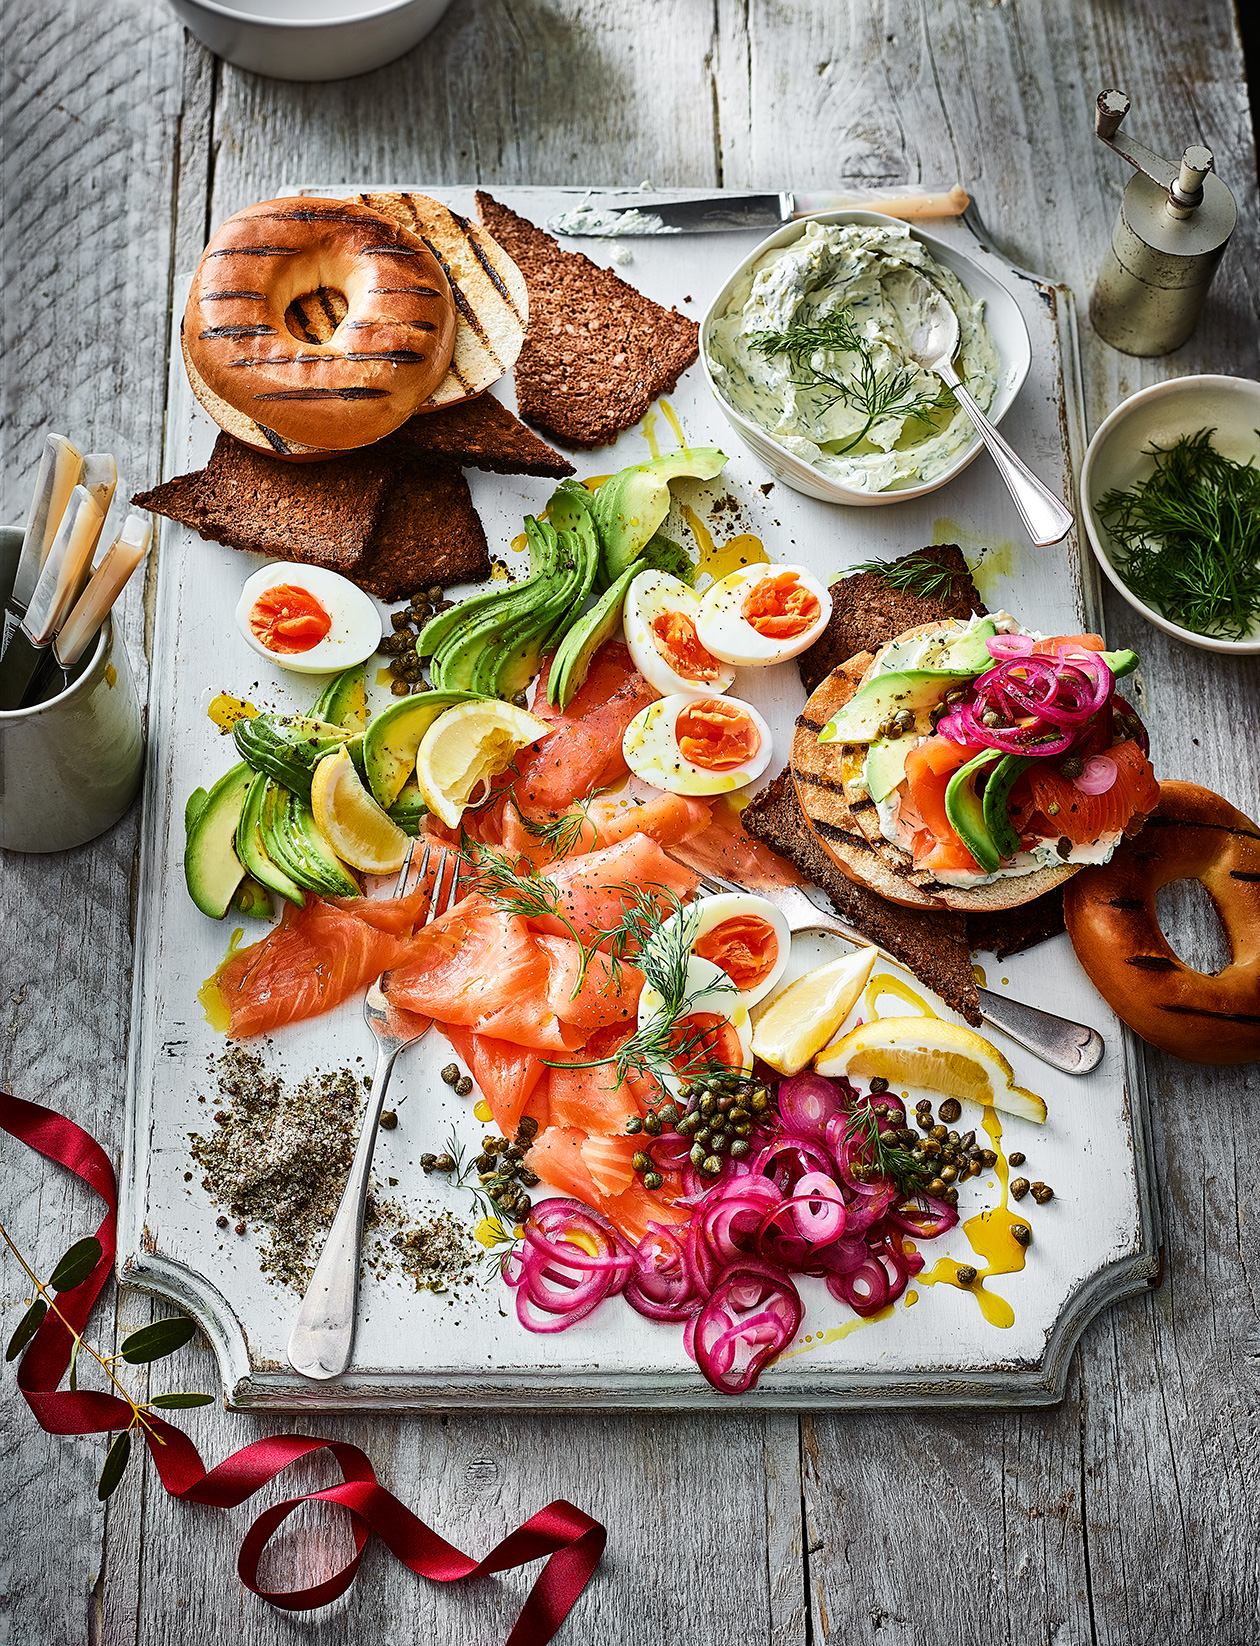 Smoked Salmon For Breakfast : Smoked Salmon Breakfast Toast The Perfect Brunch Recipe Eating Richly : Weight smoked salmon, broken into pieces.